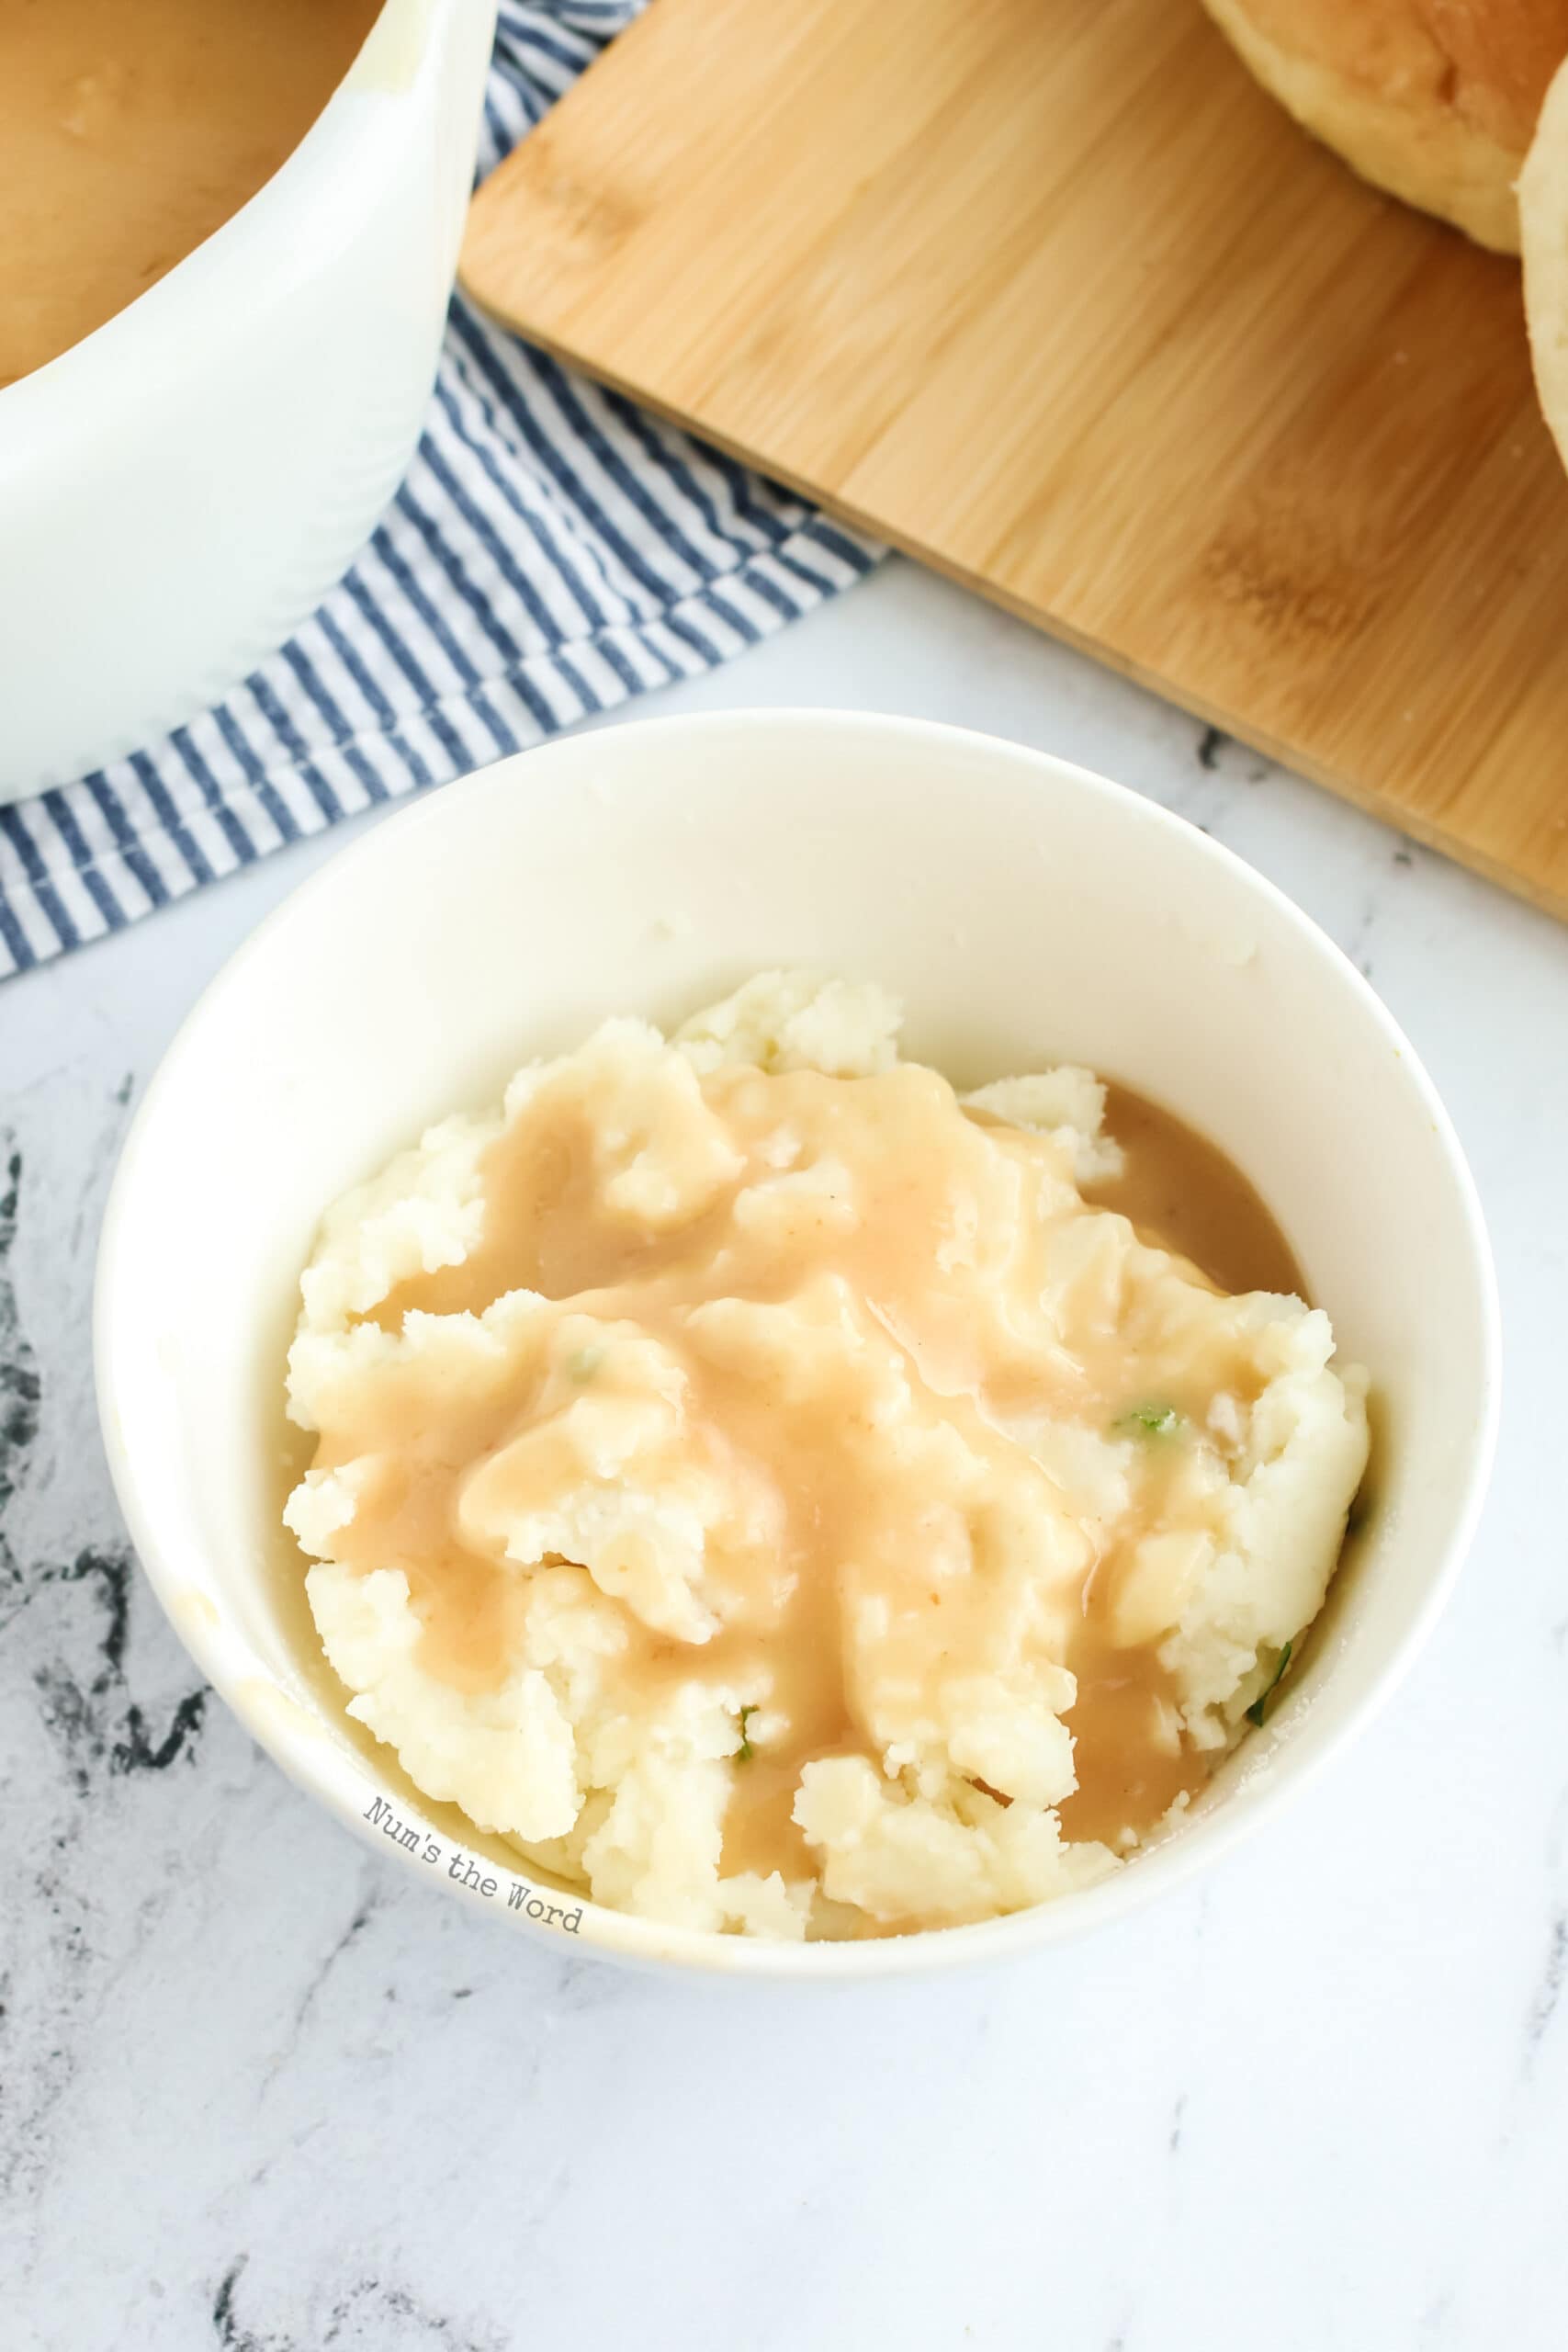 a bowl of mashed potatoes with gravy poured over.